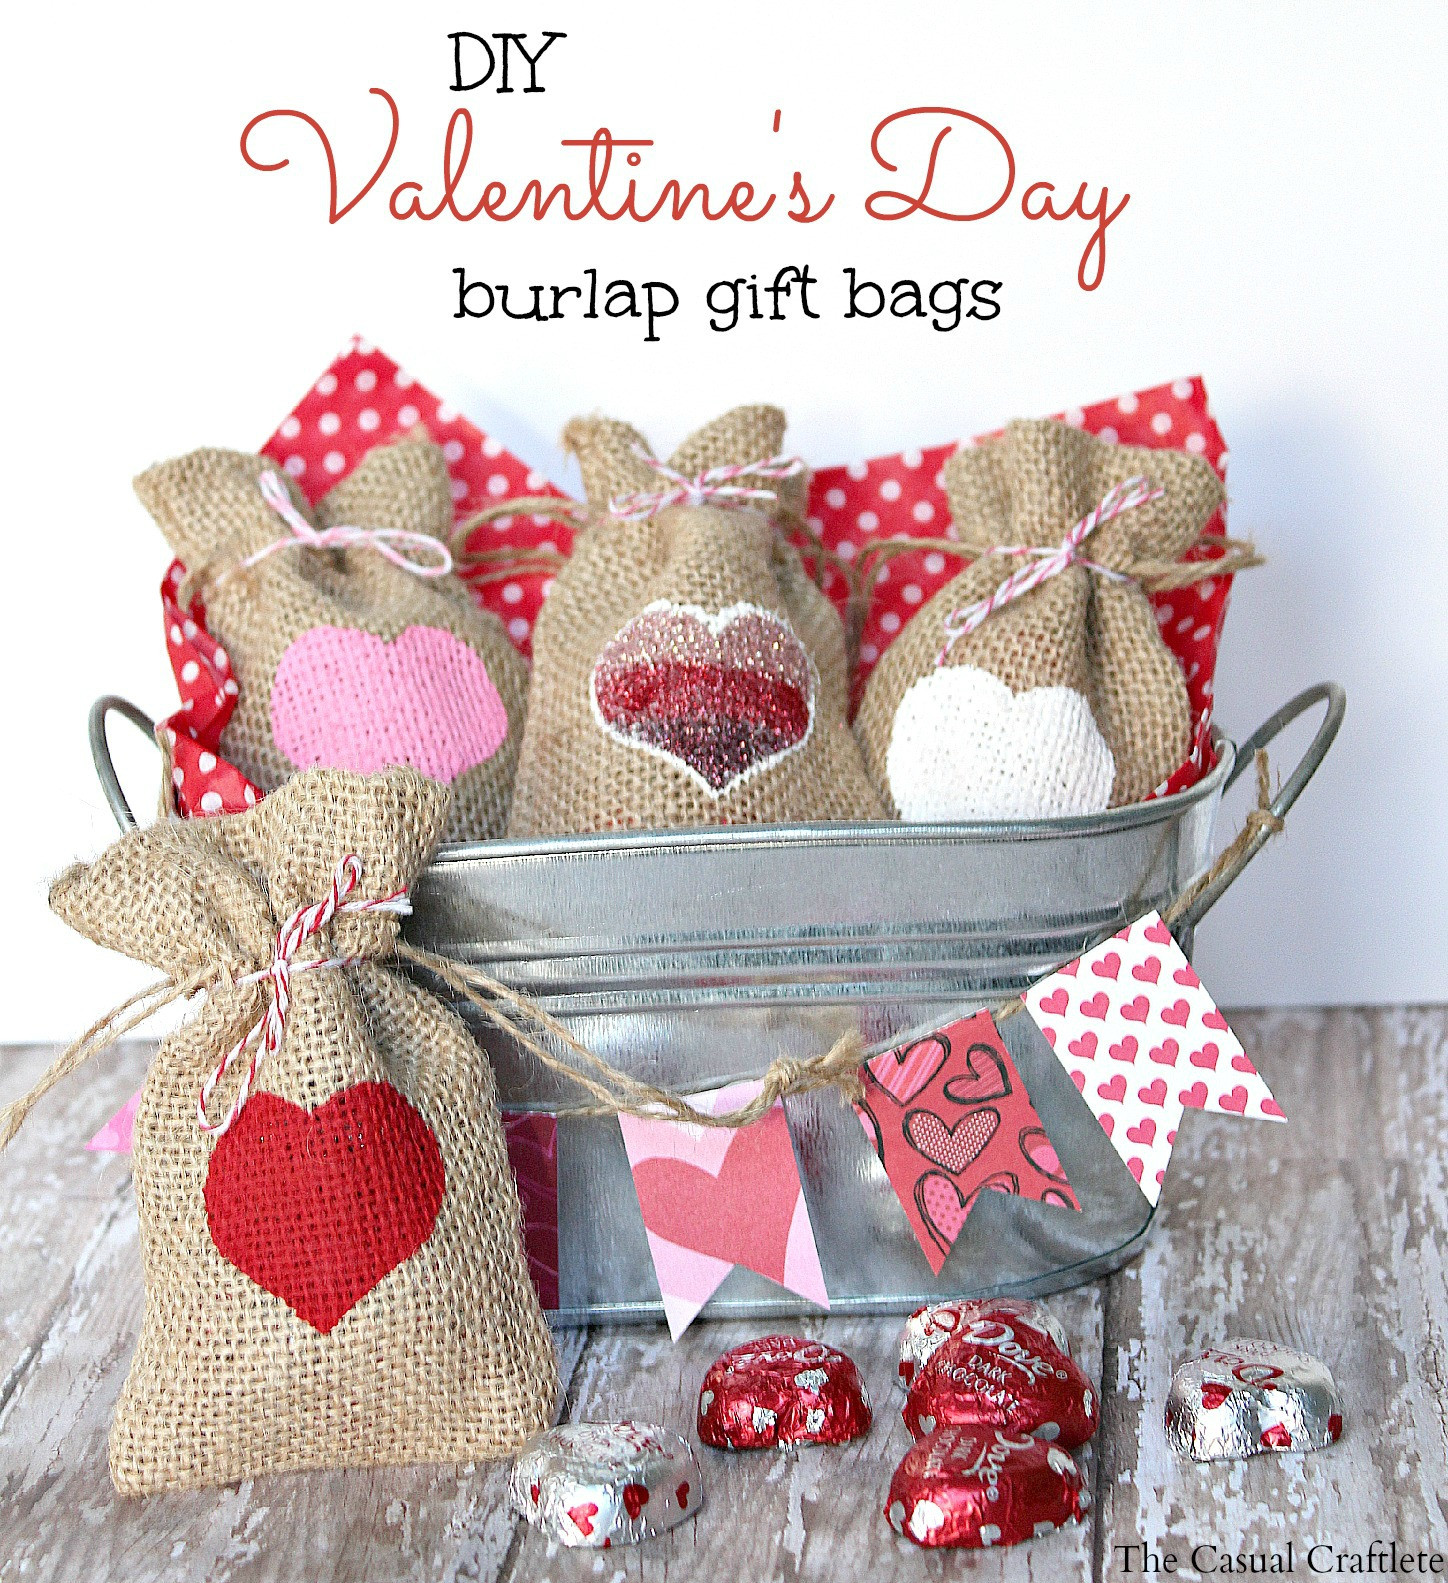 Cute Homemade Valentines Day Gifts
 DIY Valentine s Day Burlap Gift Bags